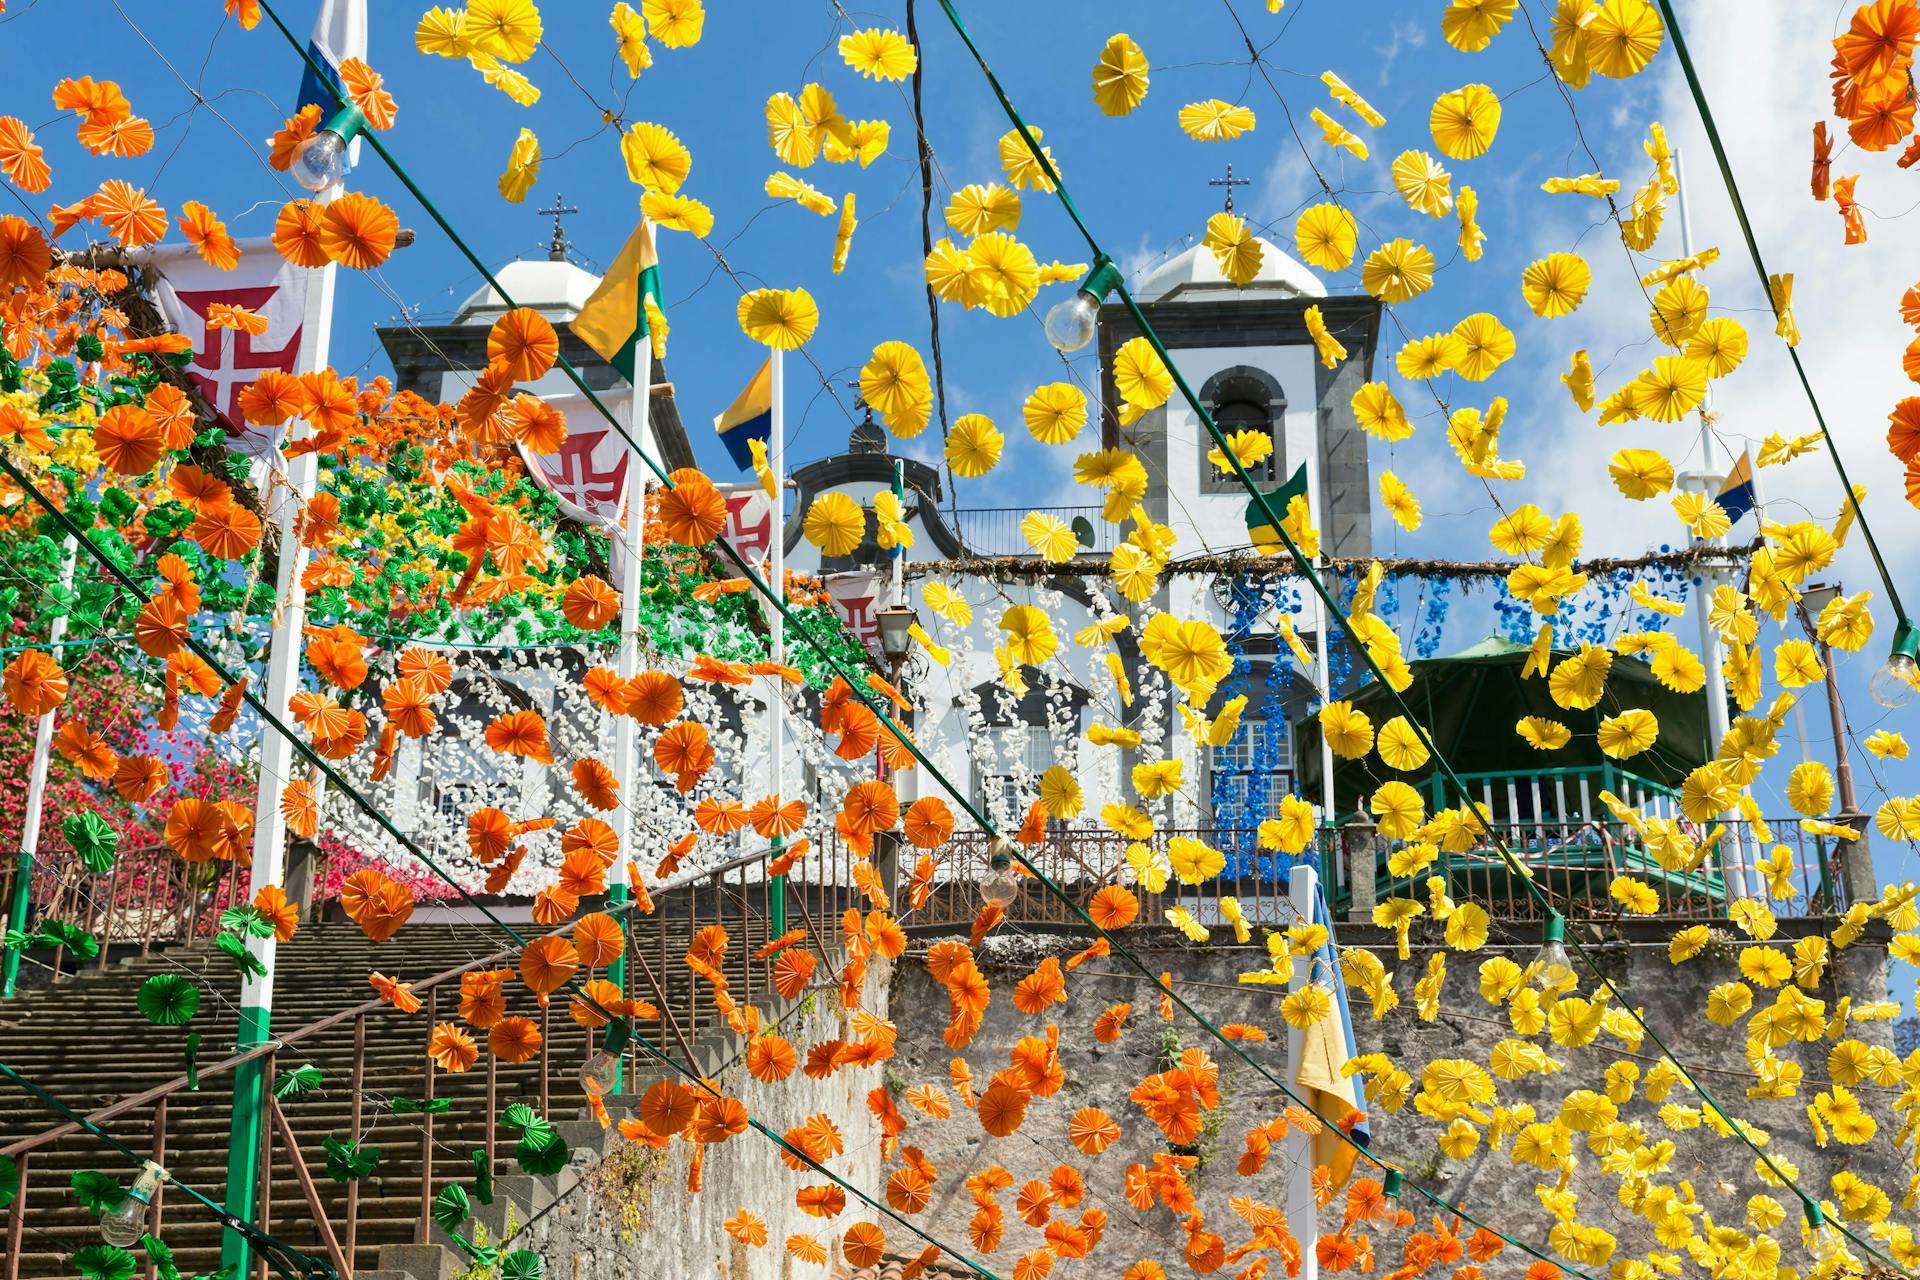 Very colorful festival decorations in Madeira. 